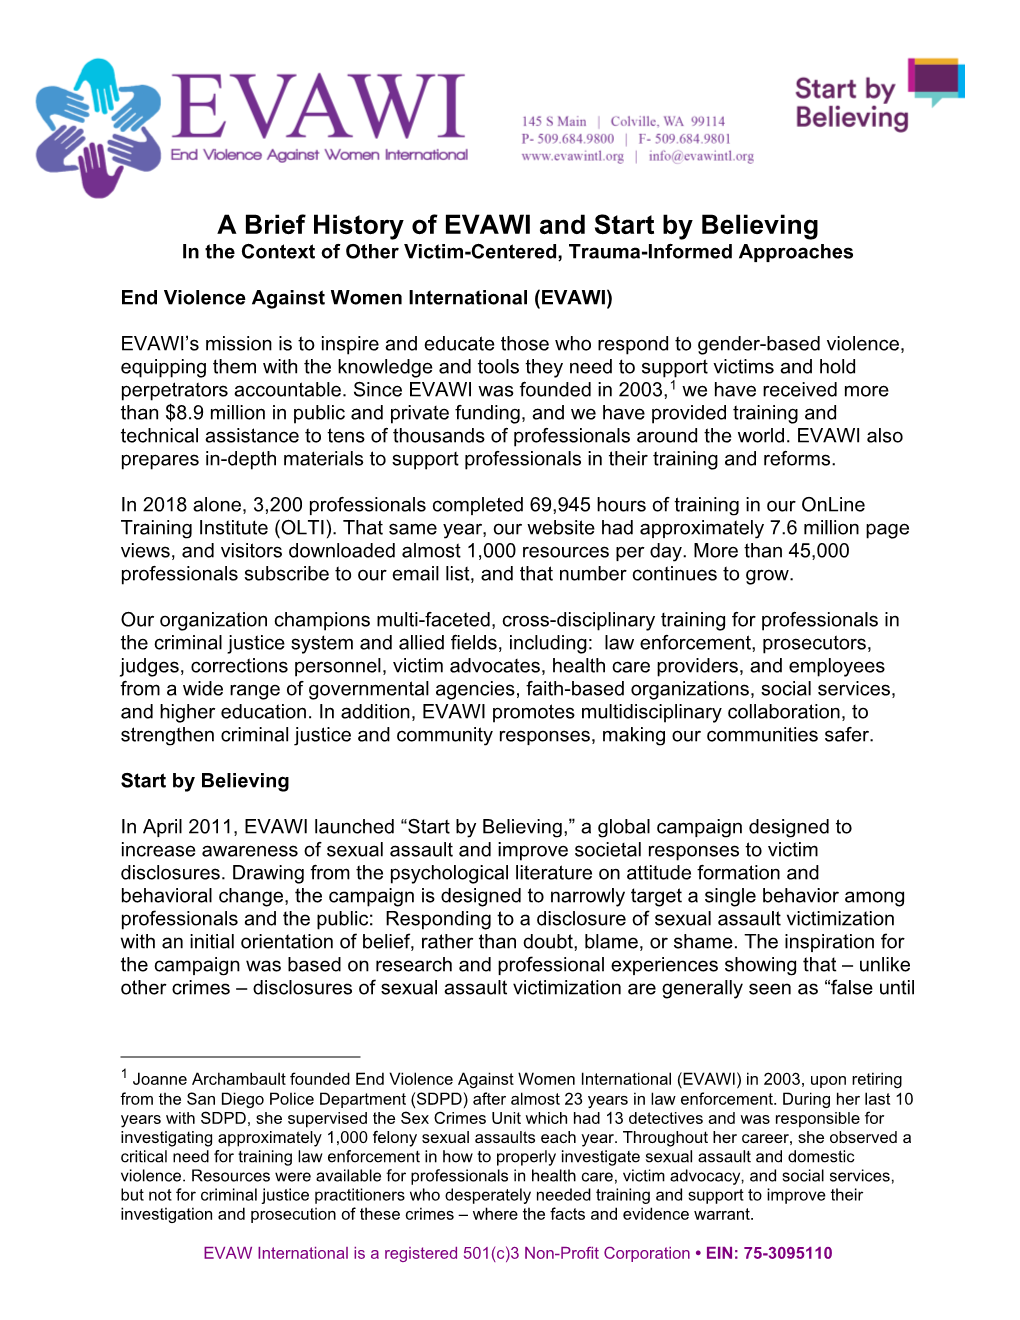 A Brief History of EVAWI and Start by Believing in the Context of Other Victim-Centered, Trauma-Informed Approaches